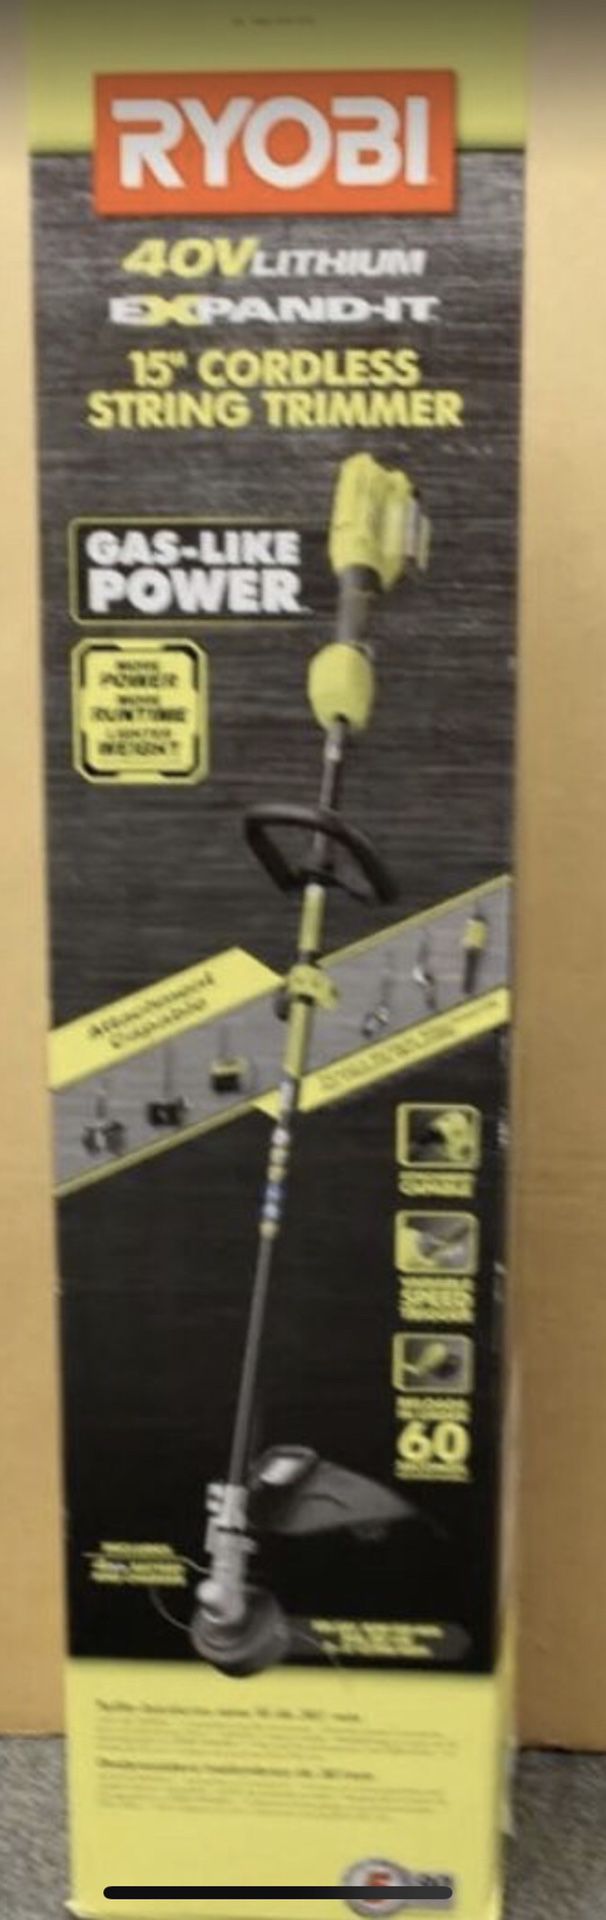 Ryobi Expand-It RY40006 40V Weed Grass String Trimmer Head/ Handle